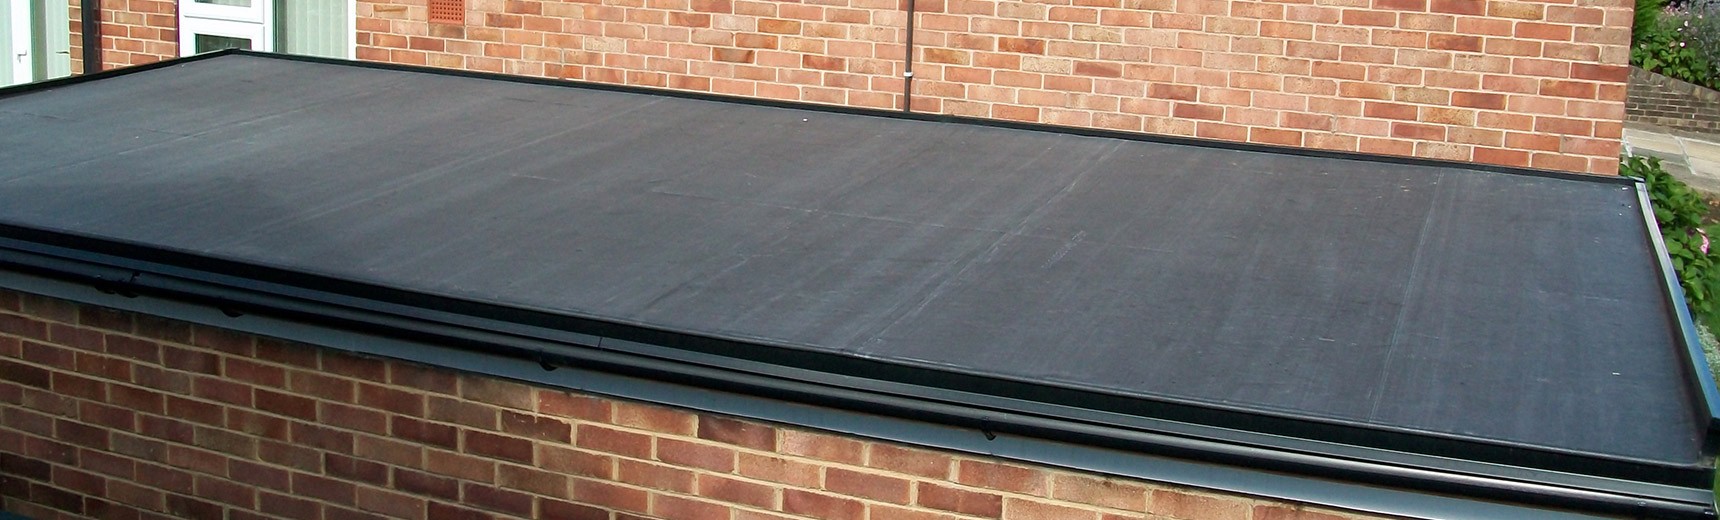 Specialist EPDM rubber roofers